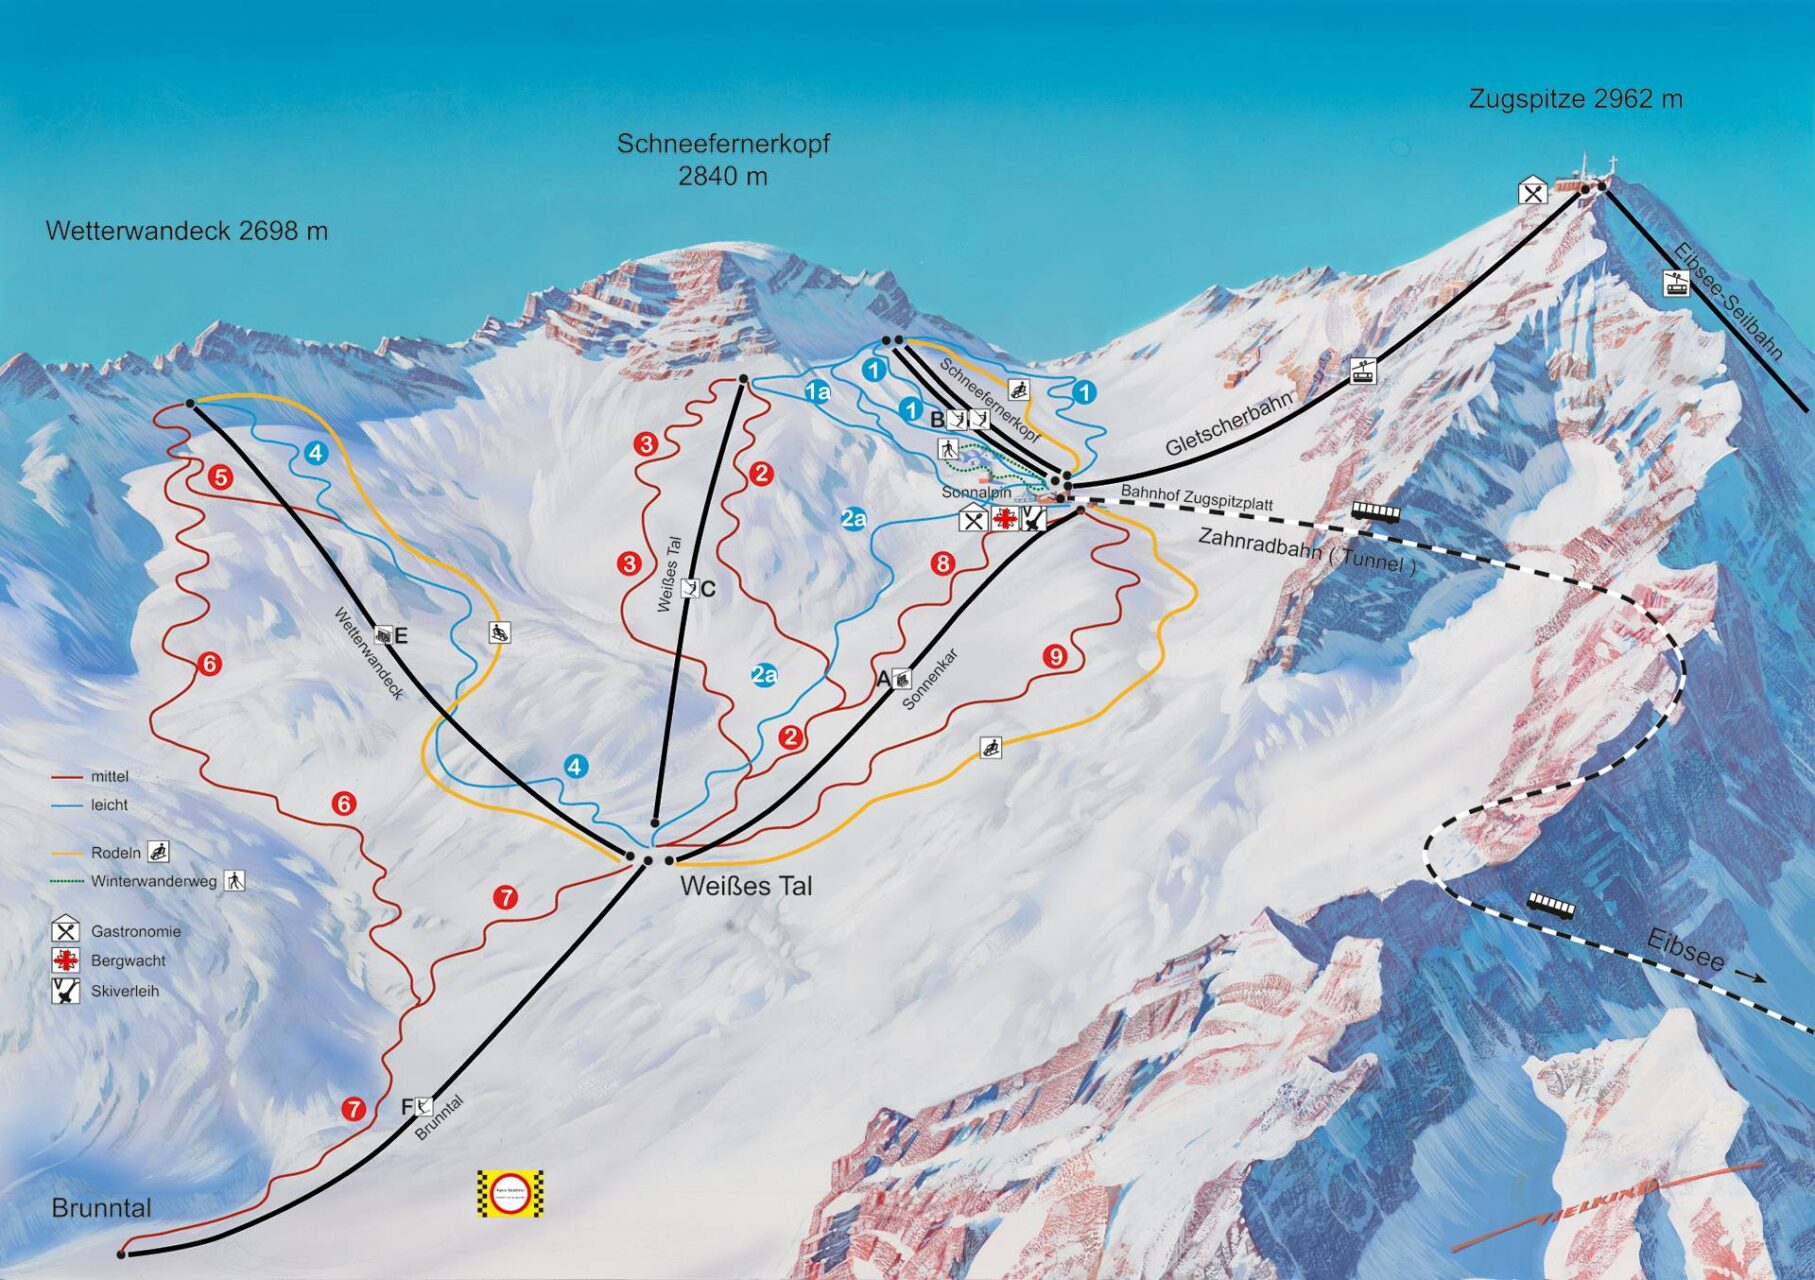 The skiing map for the Zugspitze area